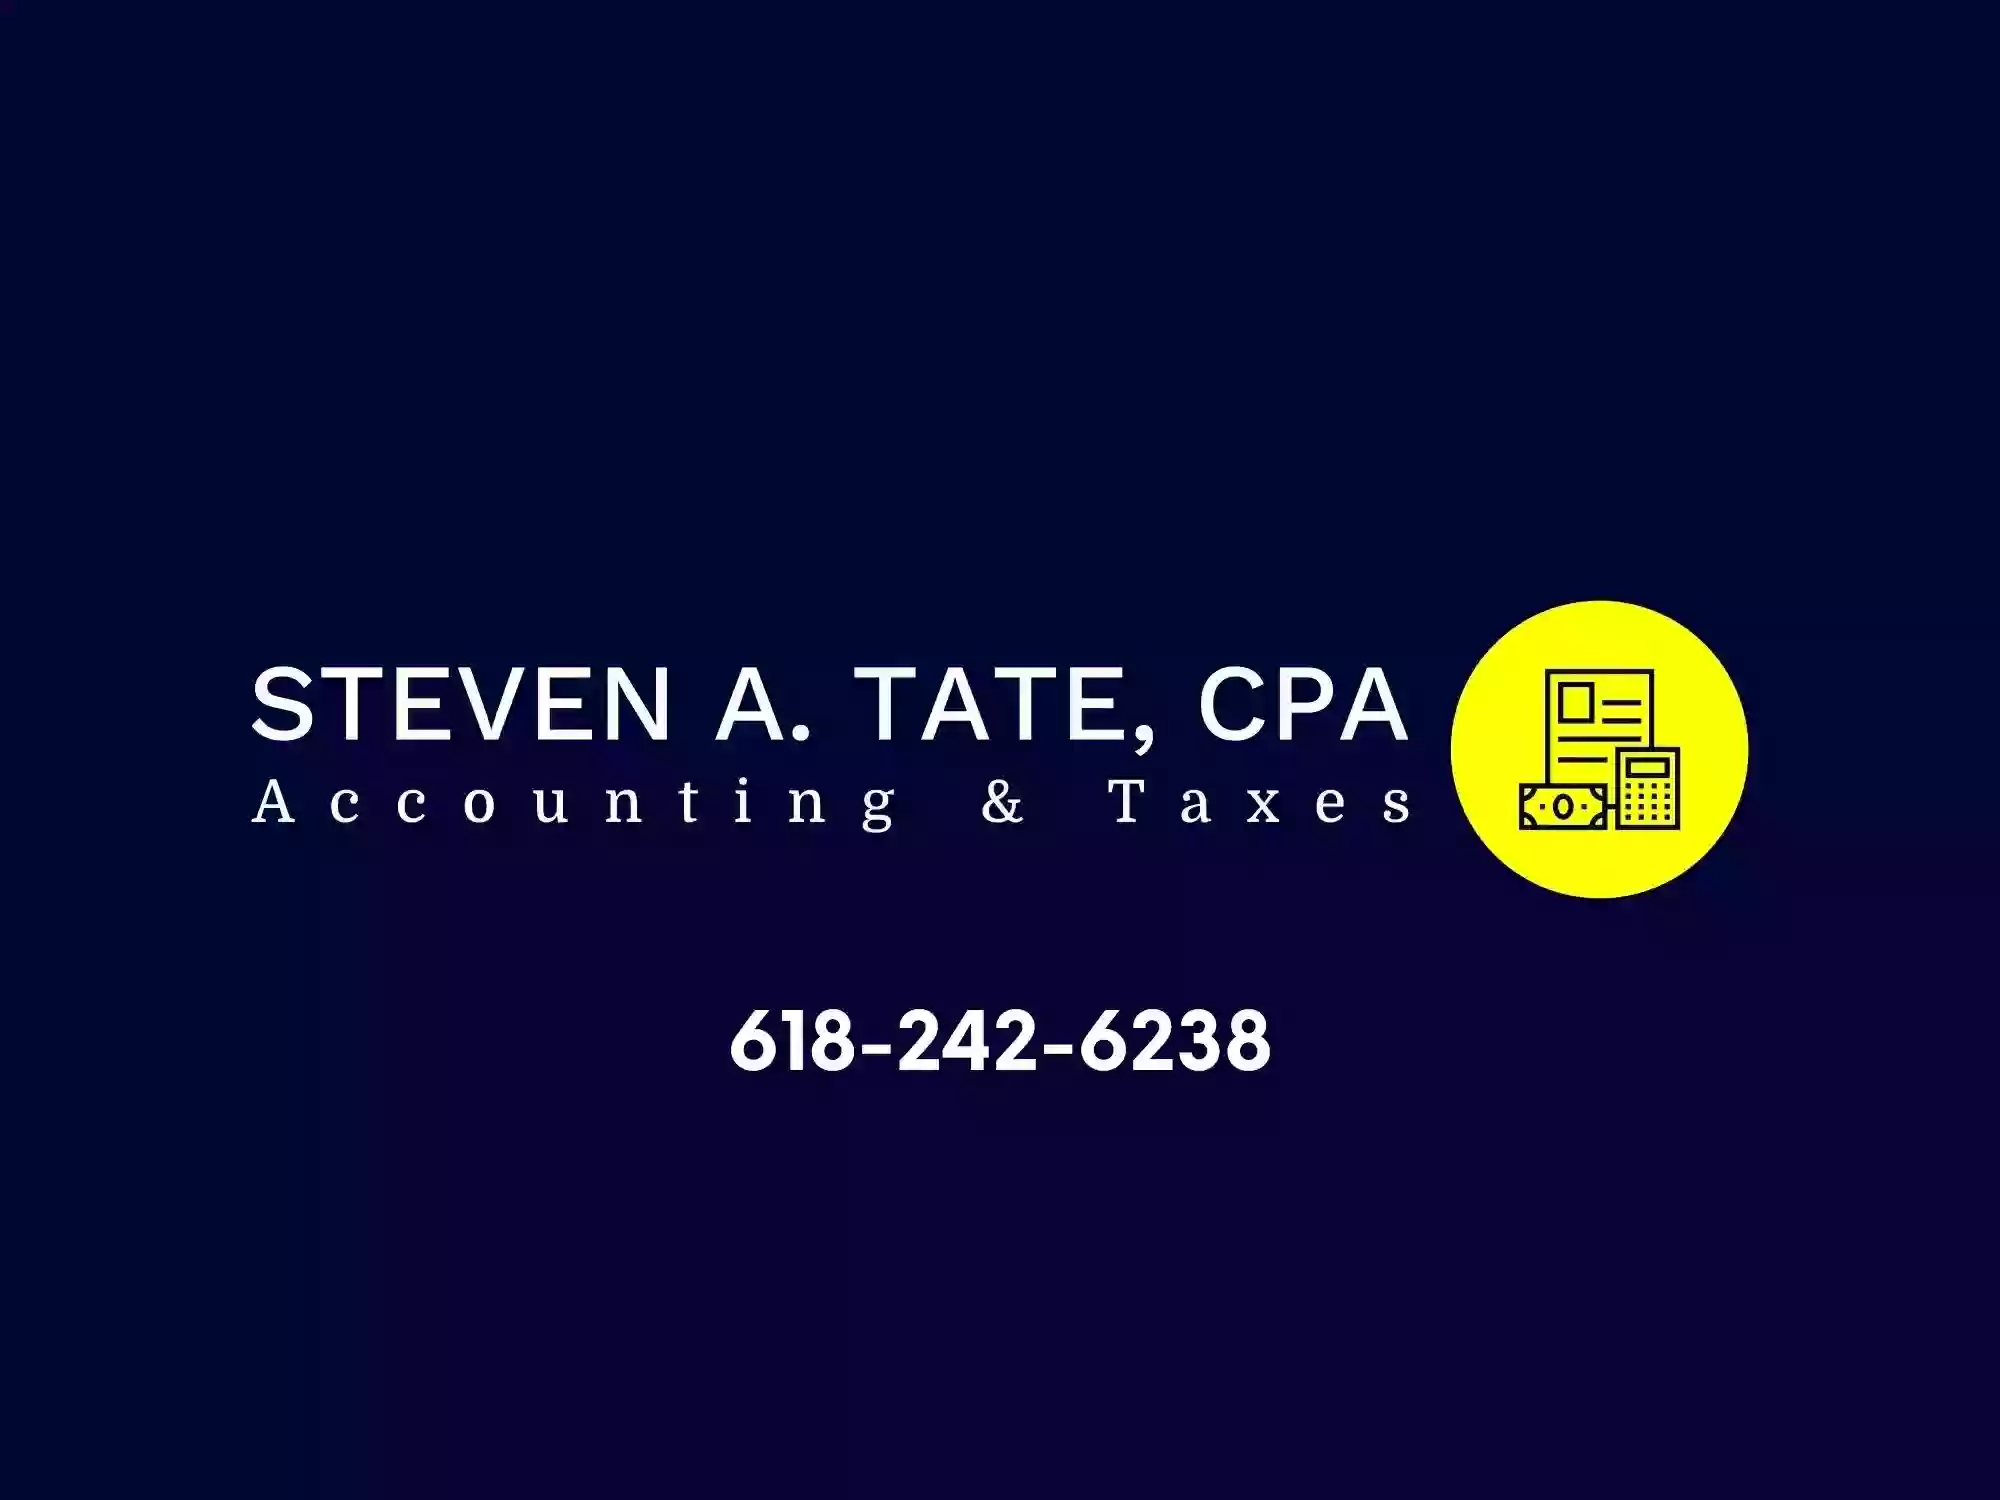 Steven A. Tate, CPA - Accounting & Taxes